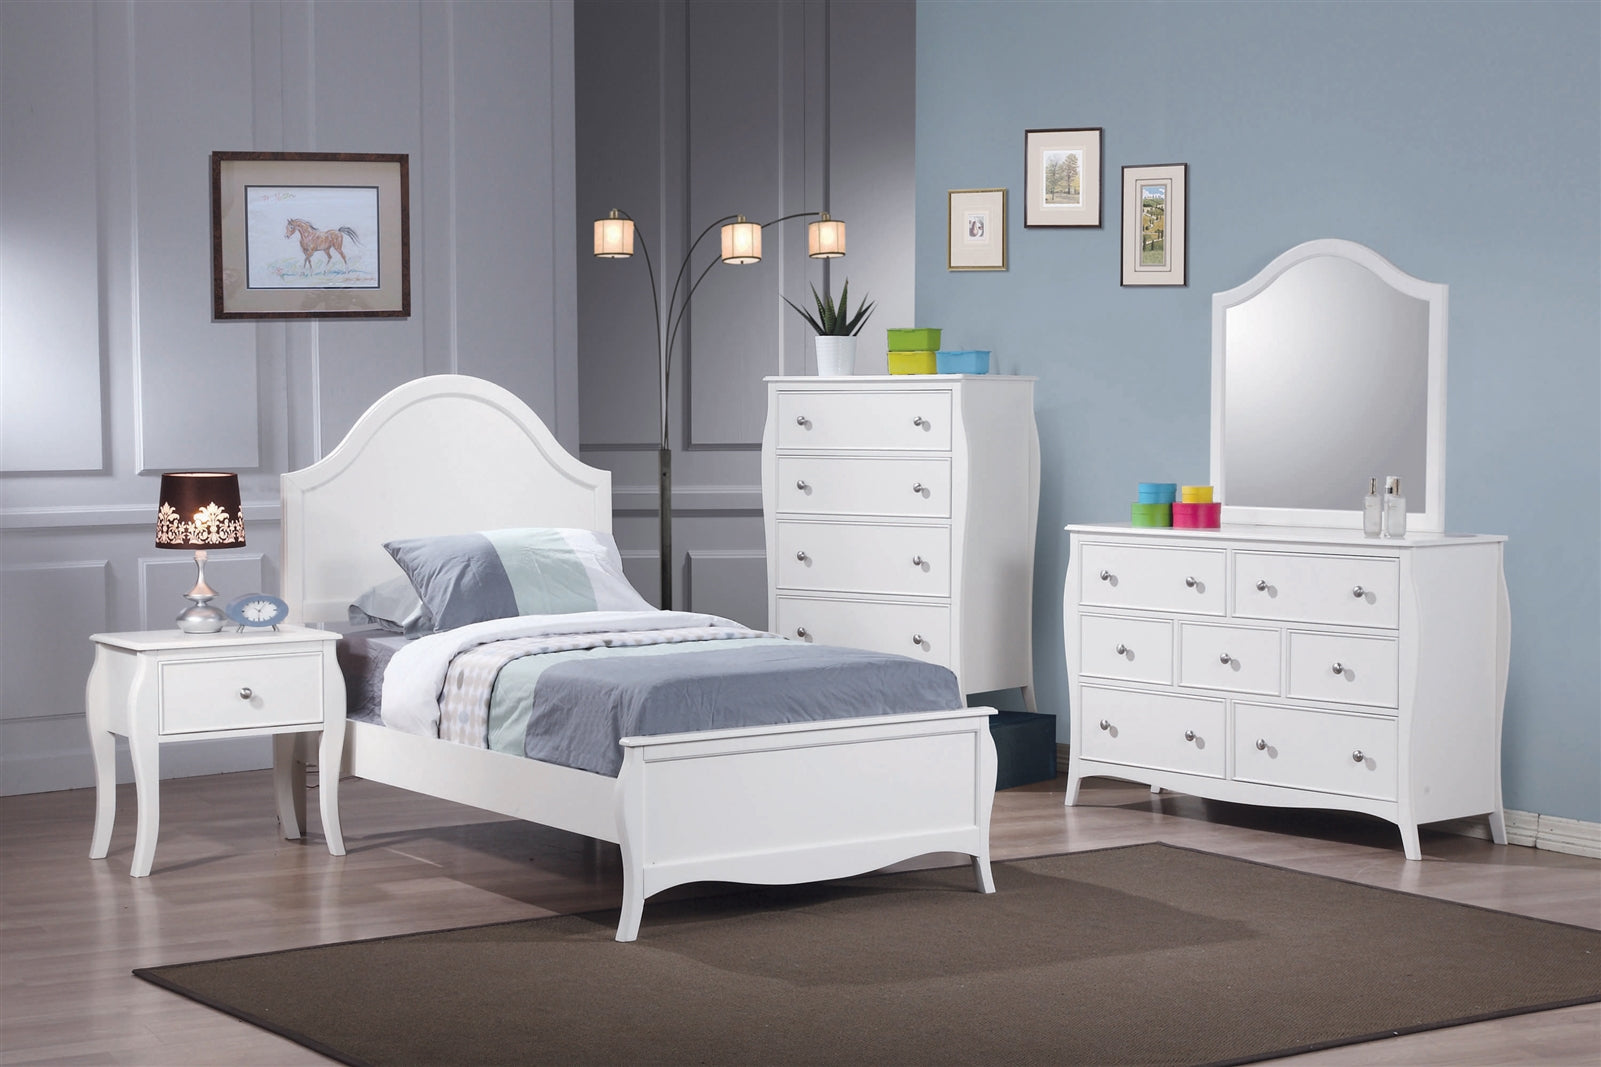 Molly Fairytale Full Bedroom Collection